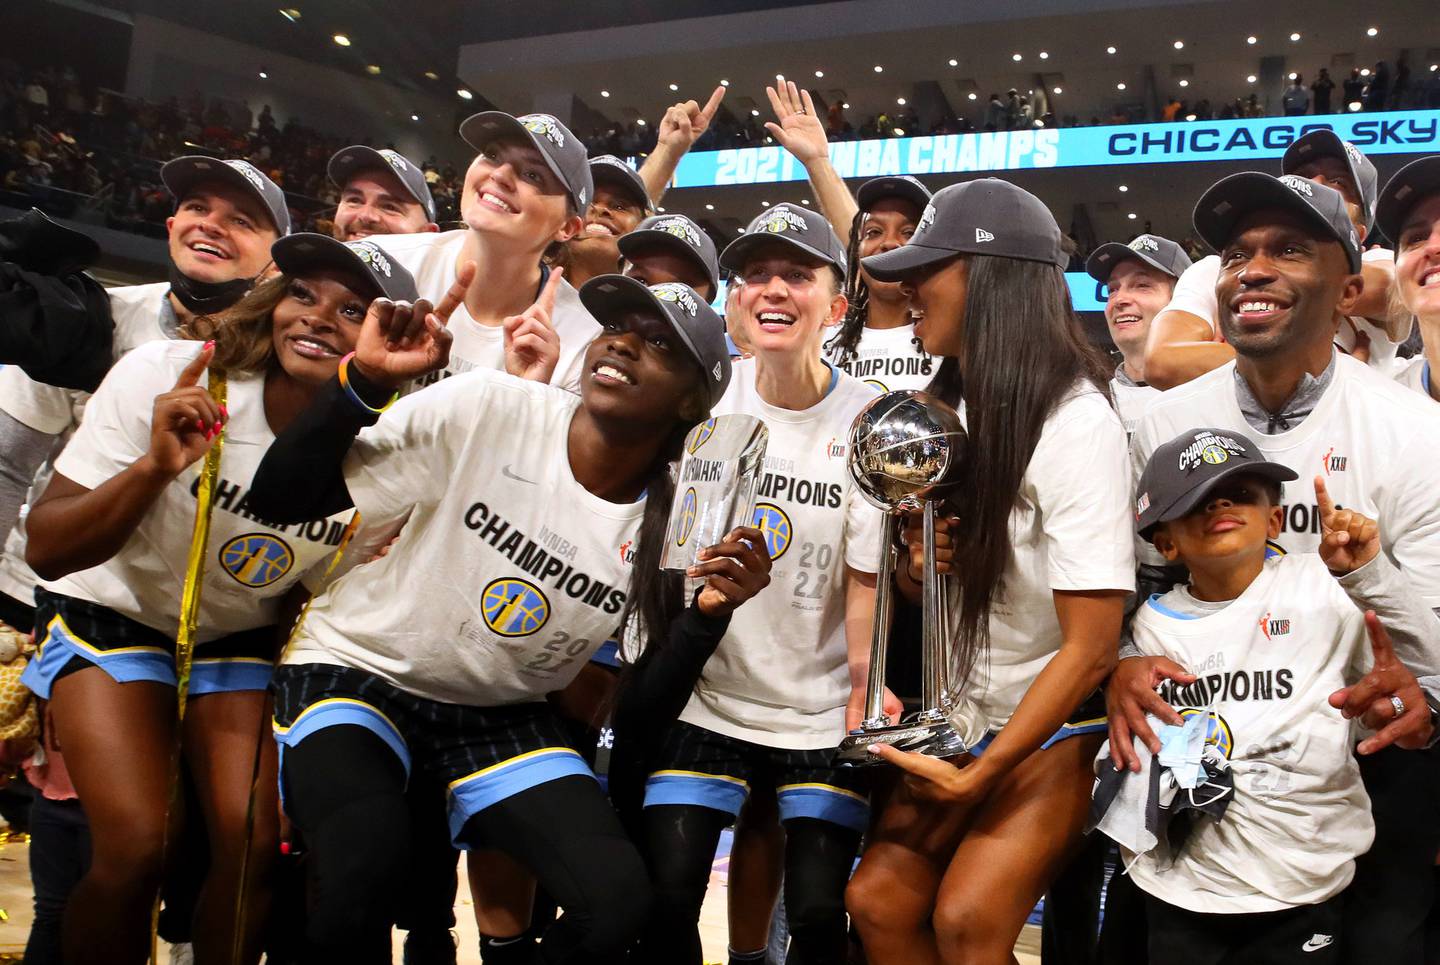 Chicago Sky players, including Kahleah Copper, second from left, celebrate after winning the WNBA championship, 80-74, against the Phoenix Mercury on Oct. 17, 2021, at Wintrust Arena.